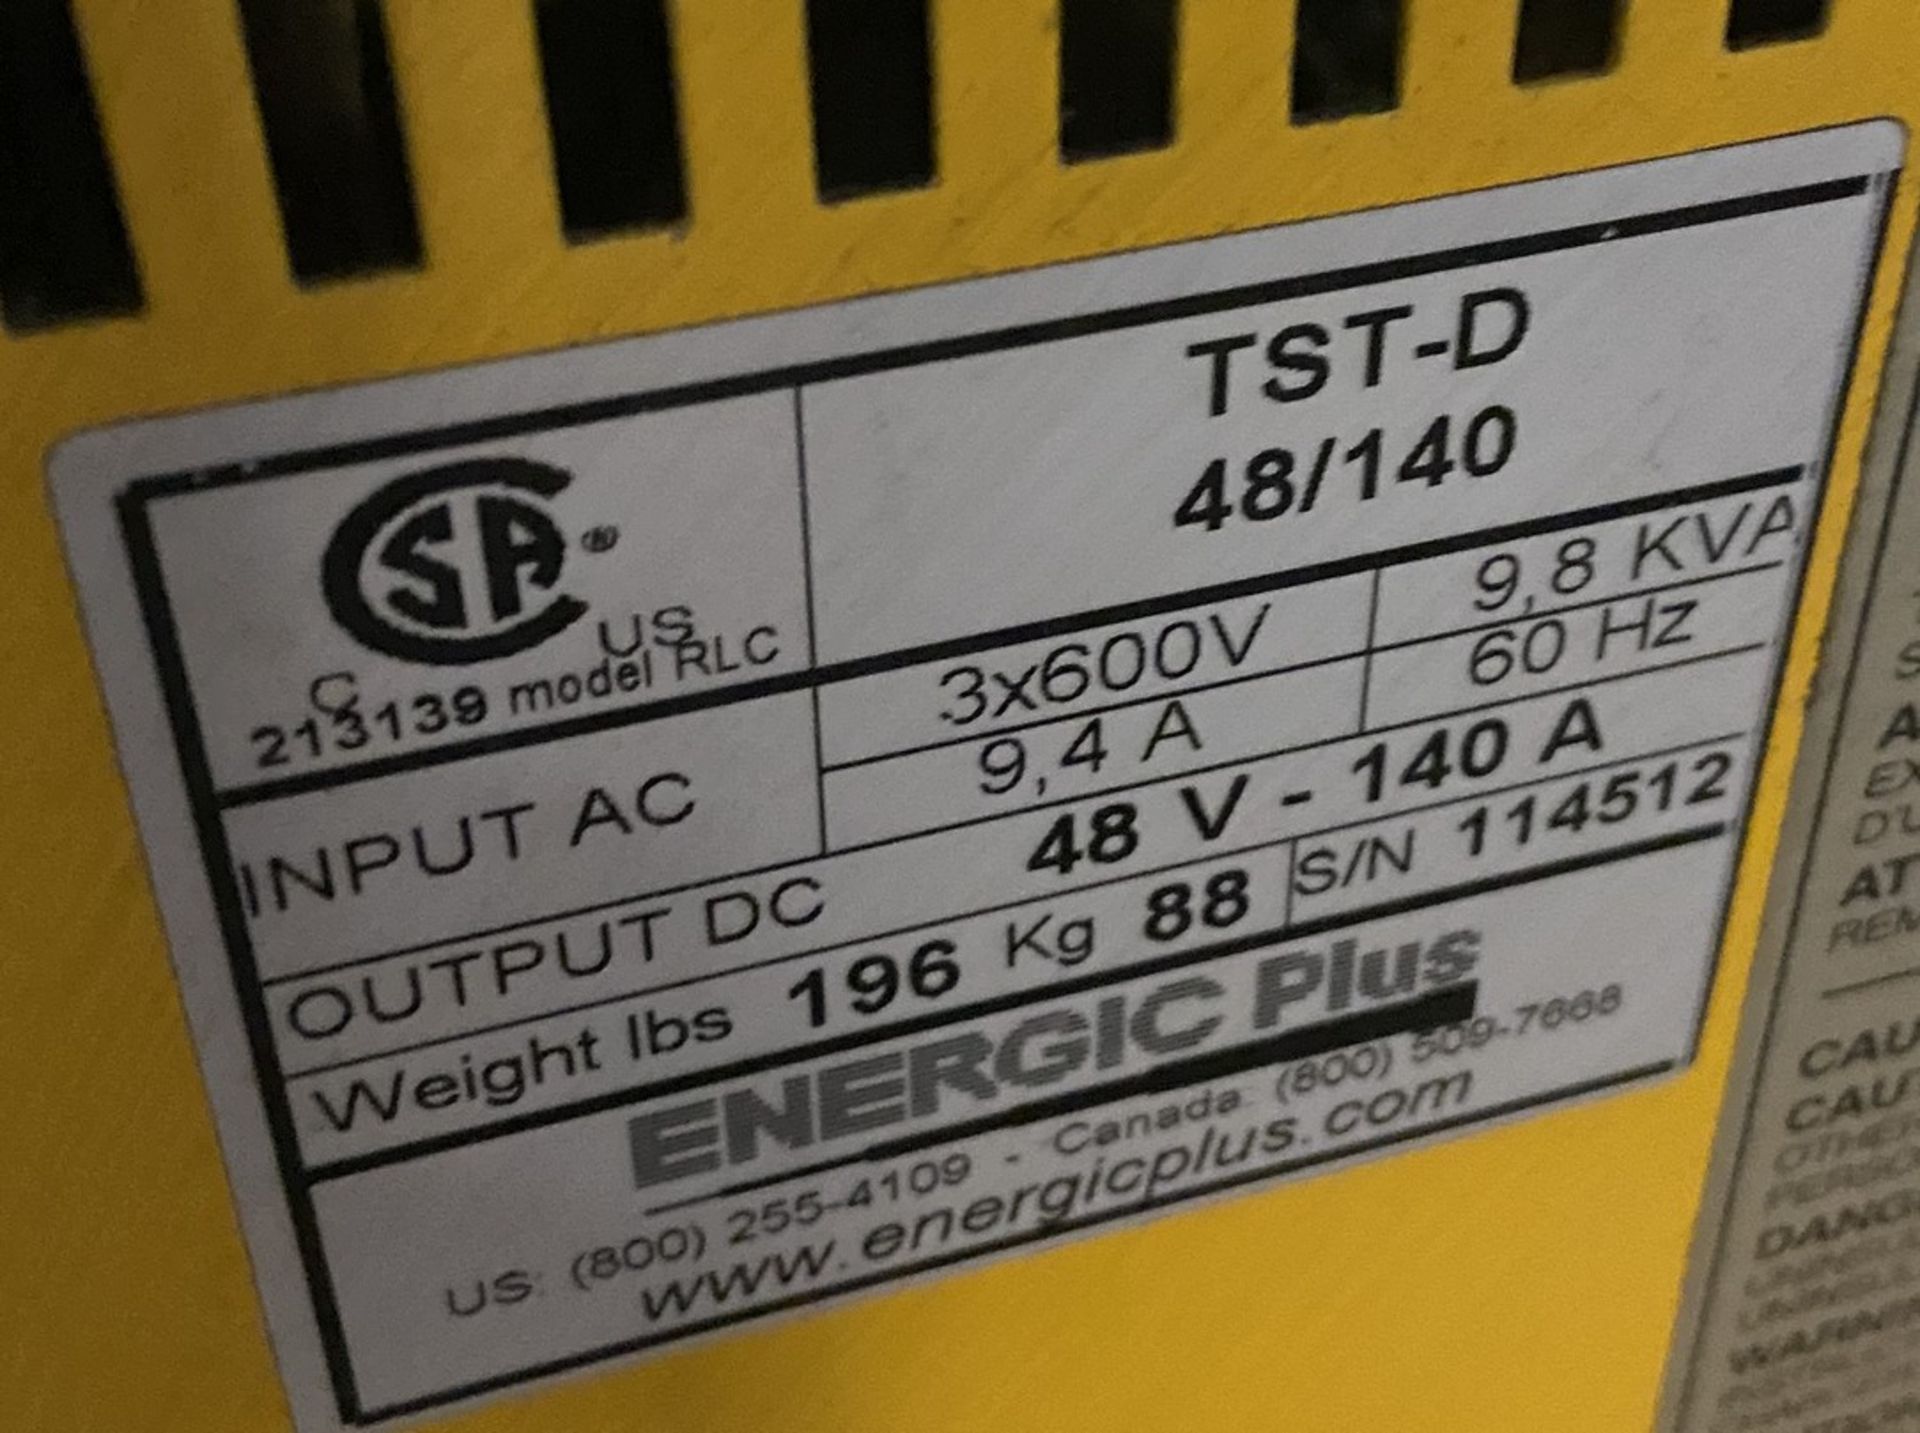 ENERGIC PLUS TST-D 48/120 BATTERY CHARGER, 48V-120A, S/N: 114512 - Image 2 of 3